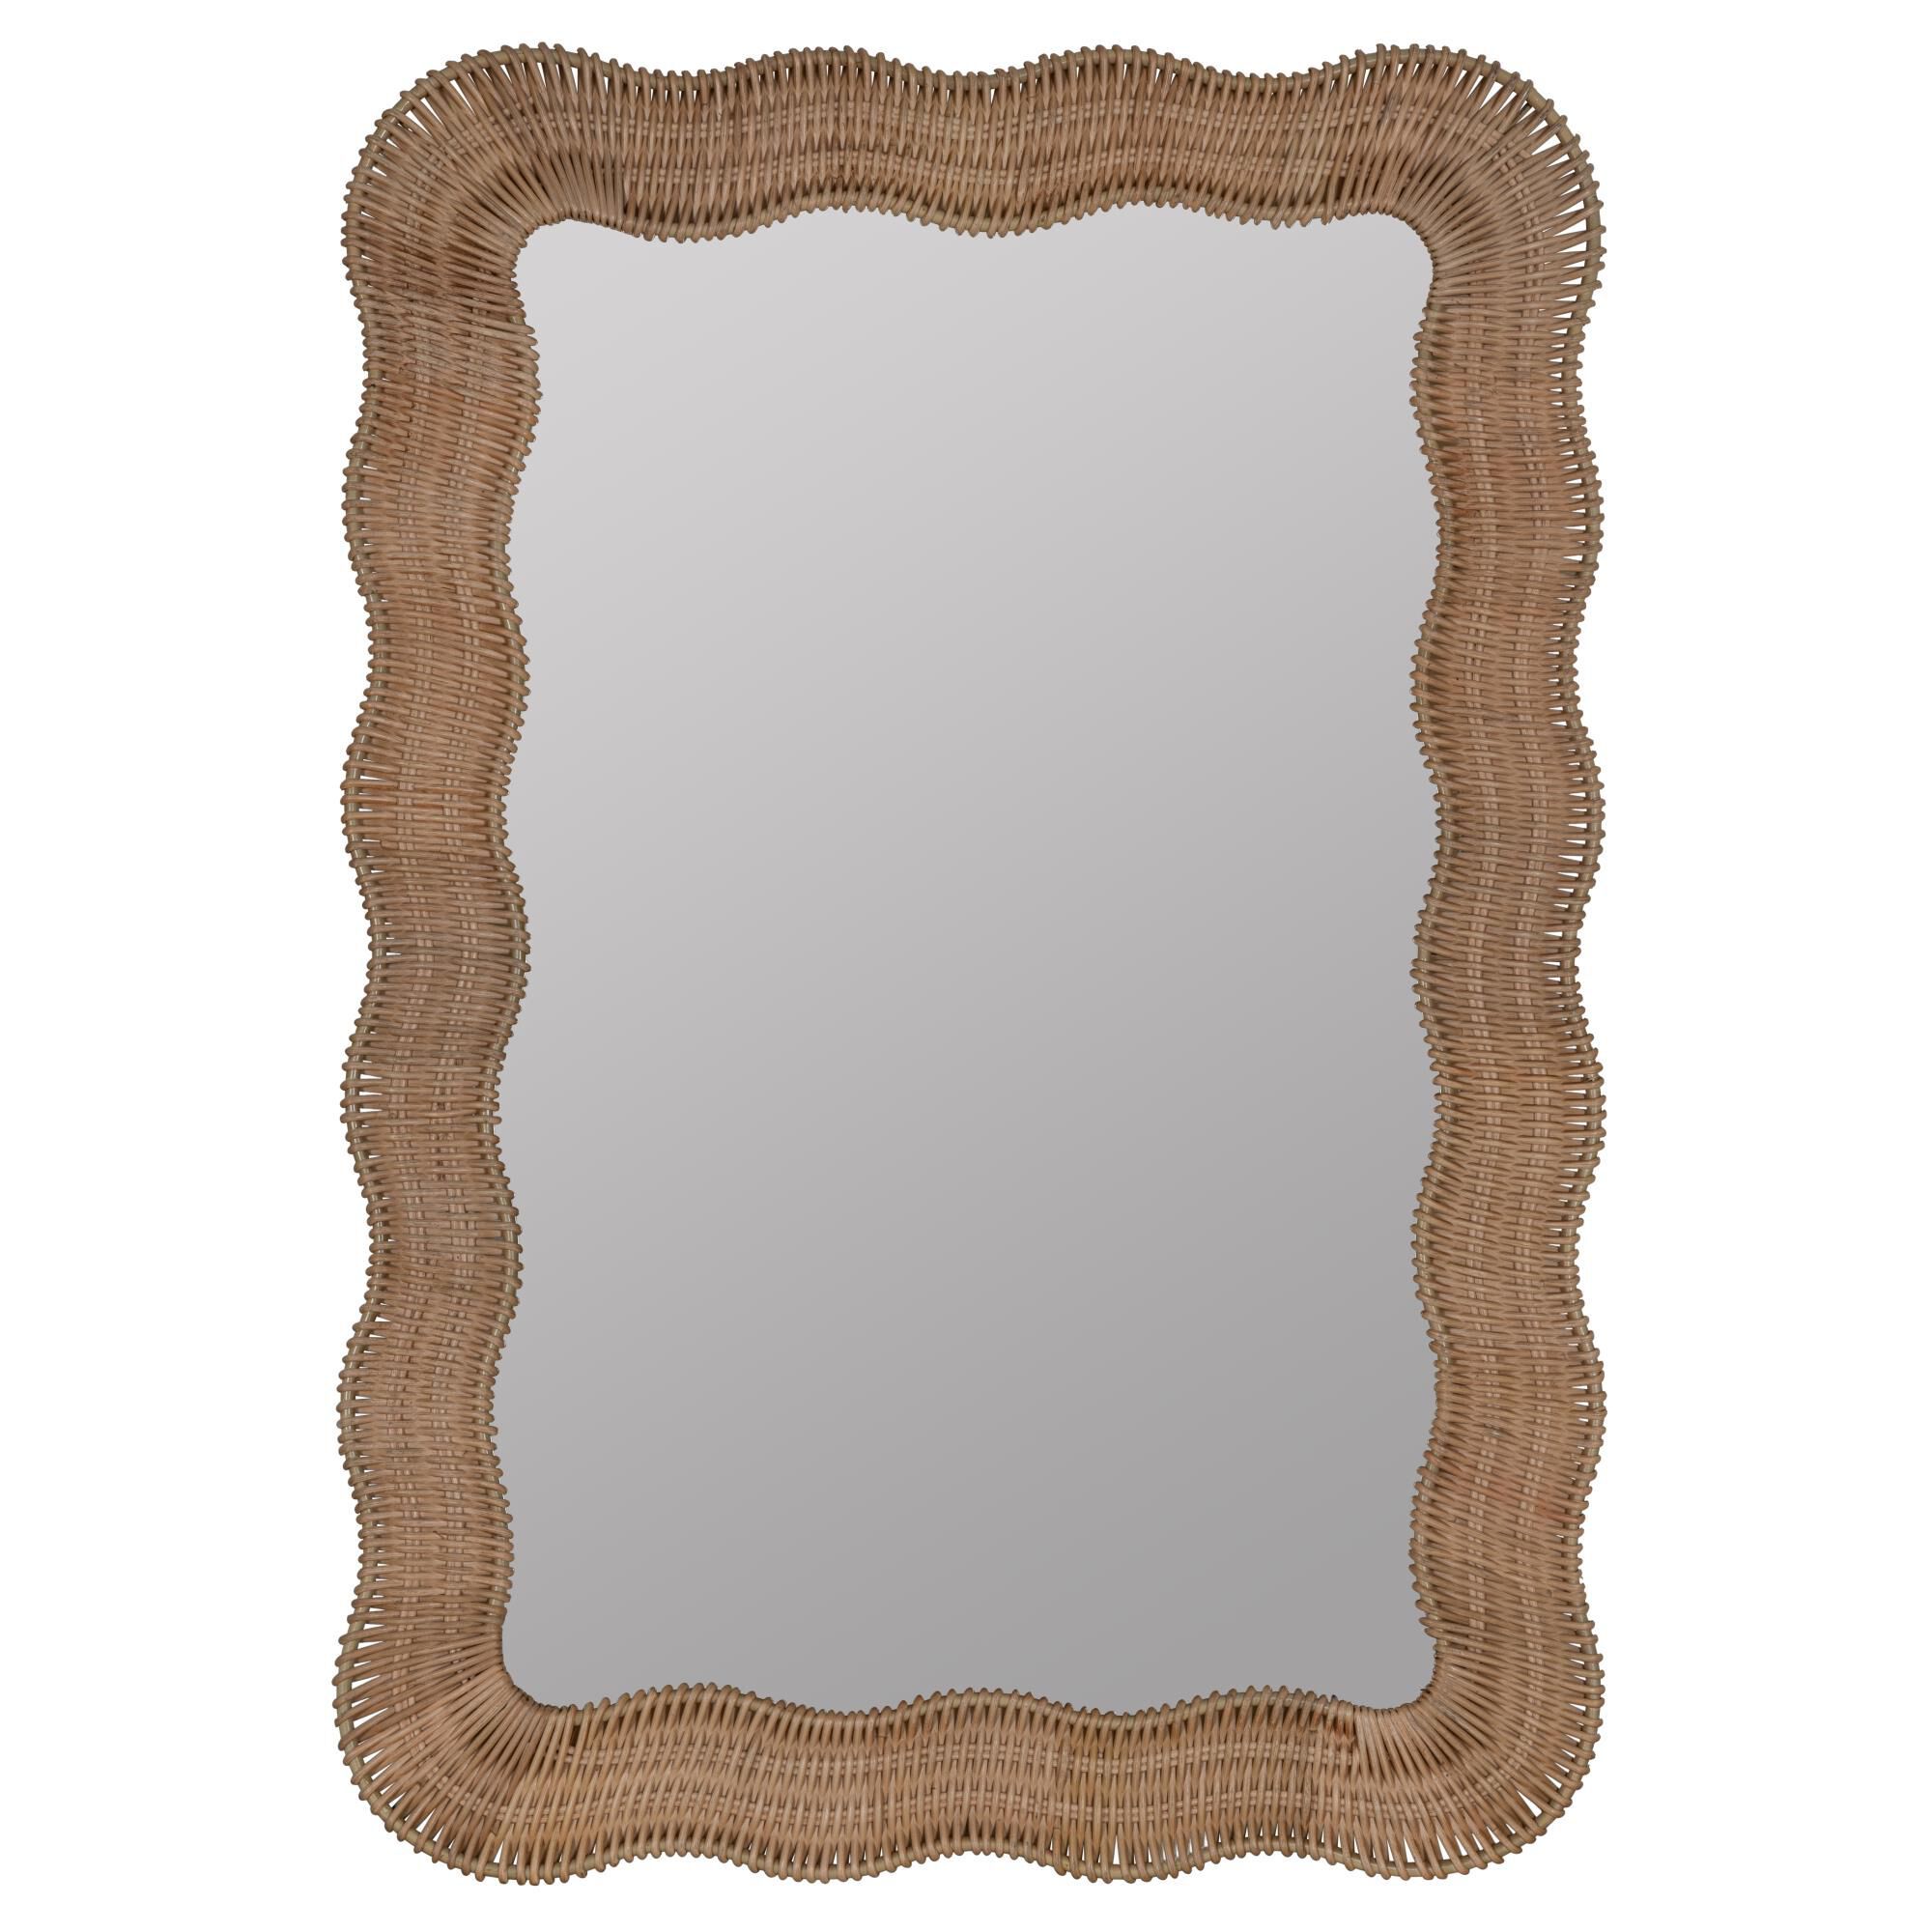 Erin Gates Scalloped Linden Decorative Mirrors by Cooper Classics | 1800 Lighting